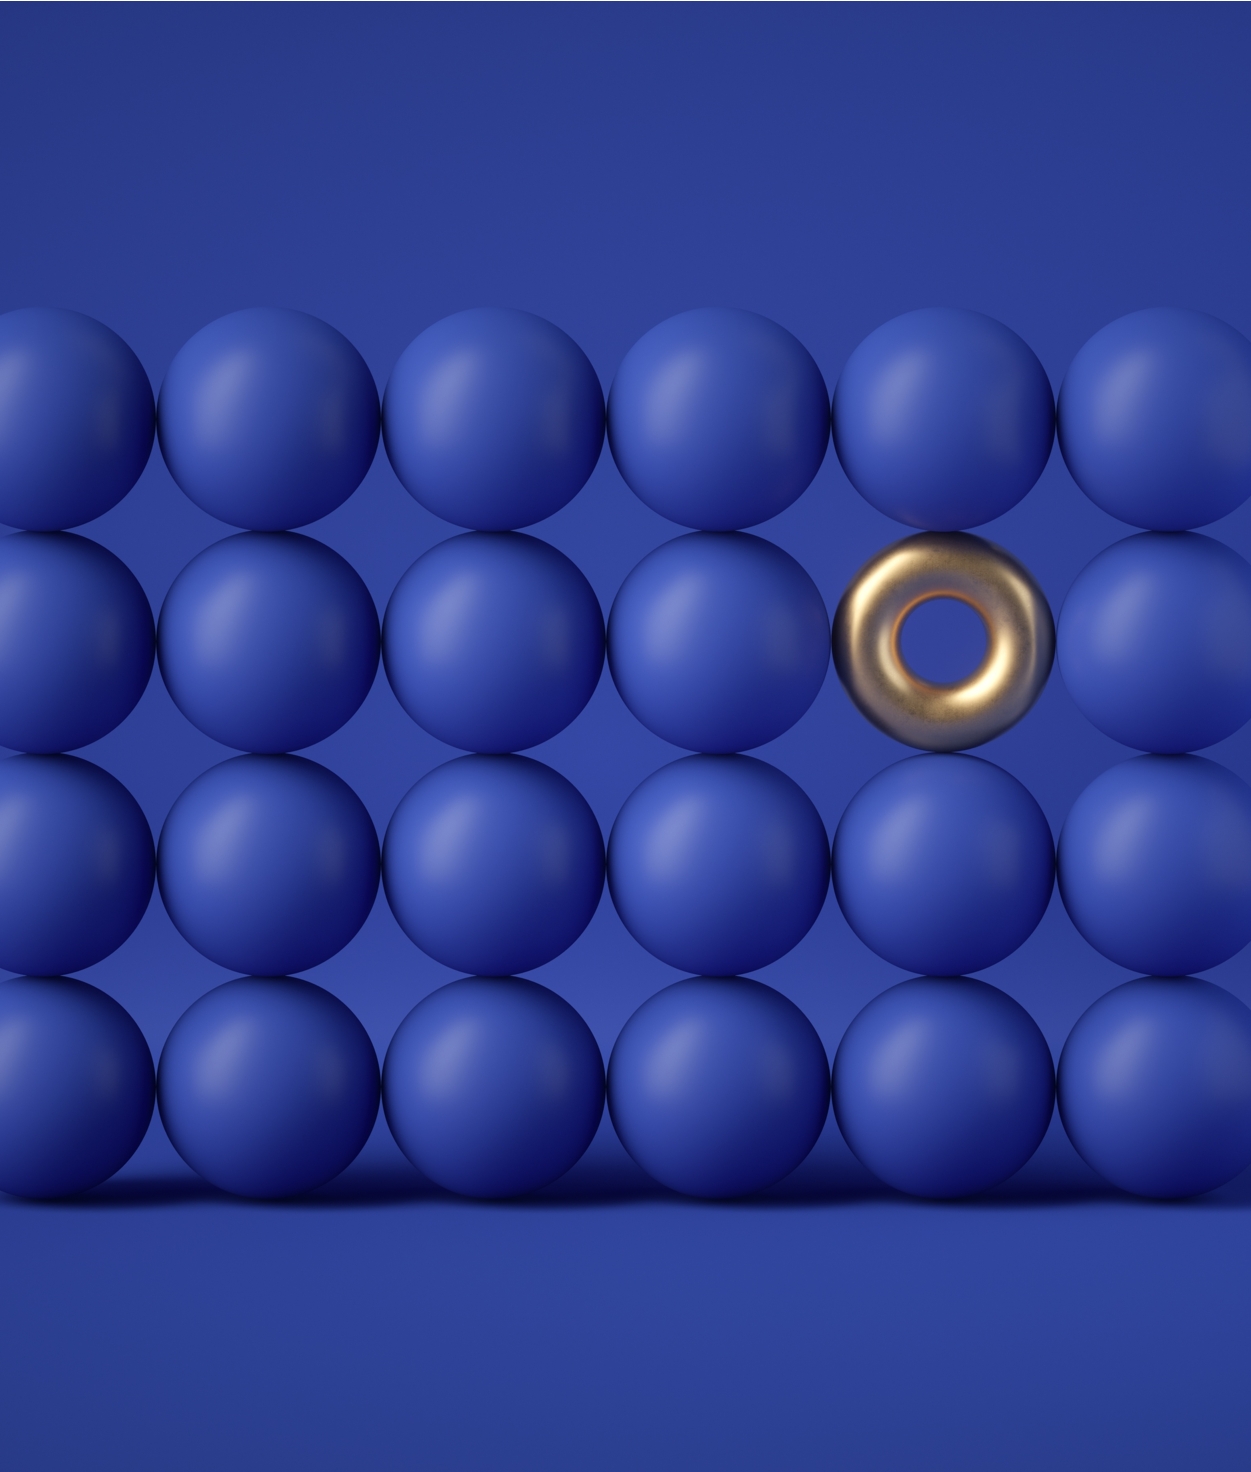 abstract geometric structure: golden torus amongst the blue donuts isolated on blue background